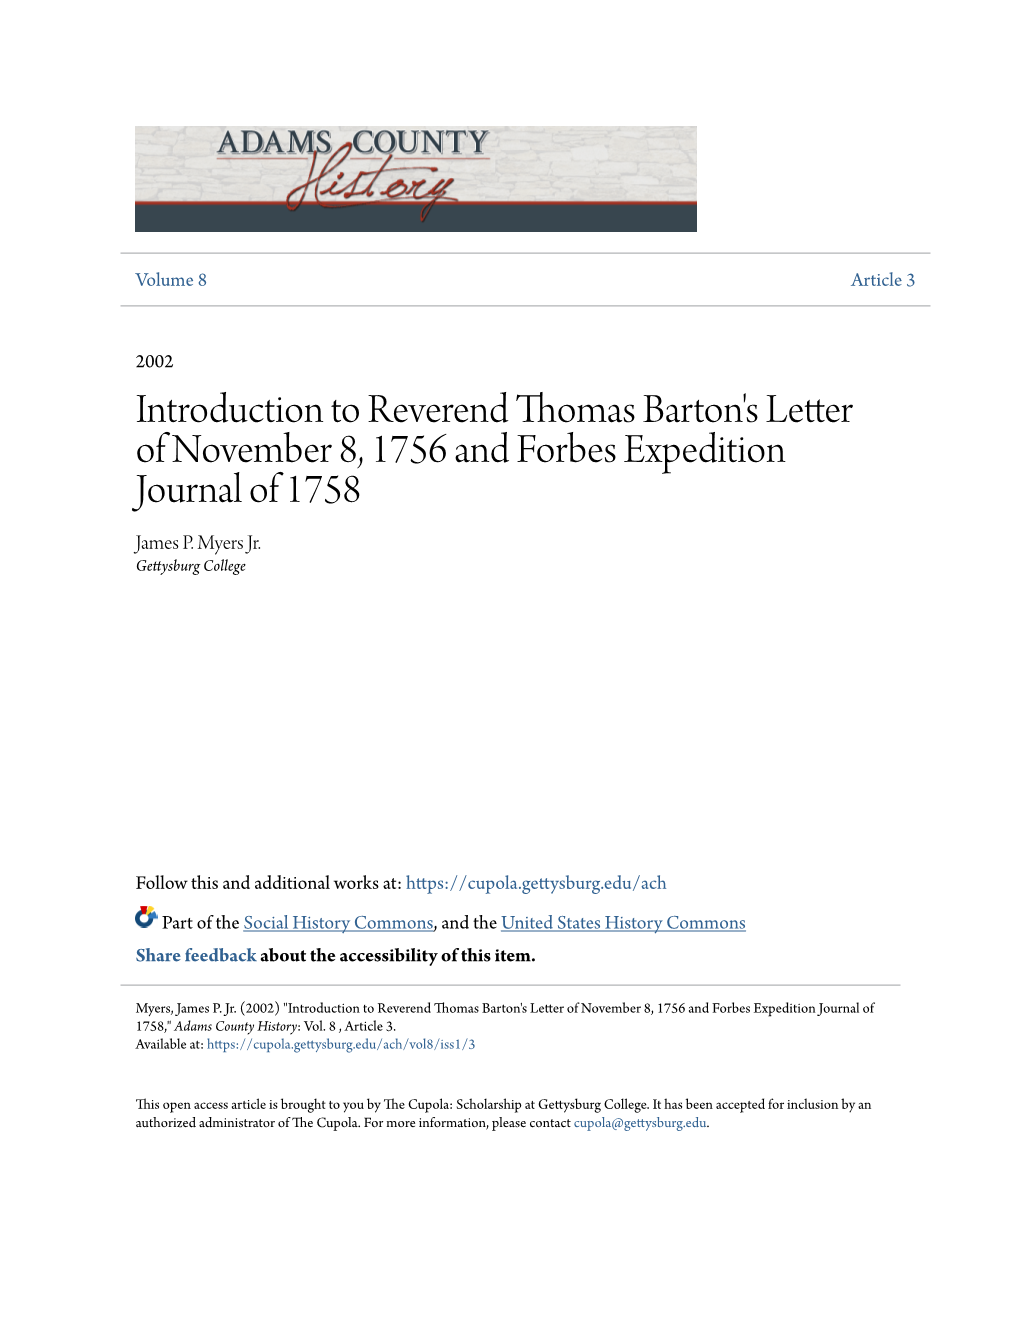 Introduction to Reverend Thomas Barton's Letter of November 8, 1756 and Forbes Expedition Journal of 1758 James P